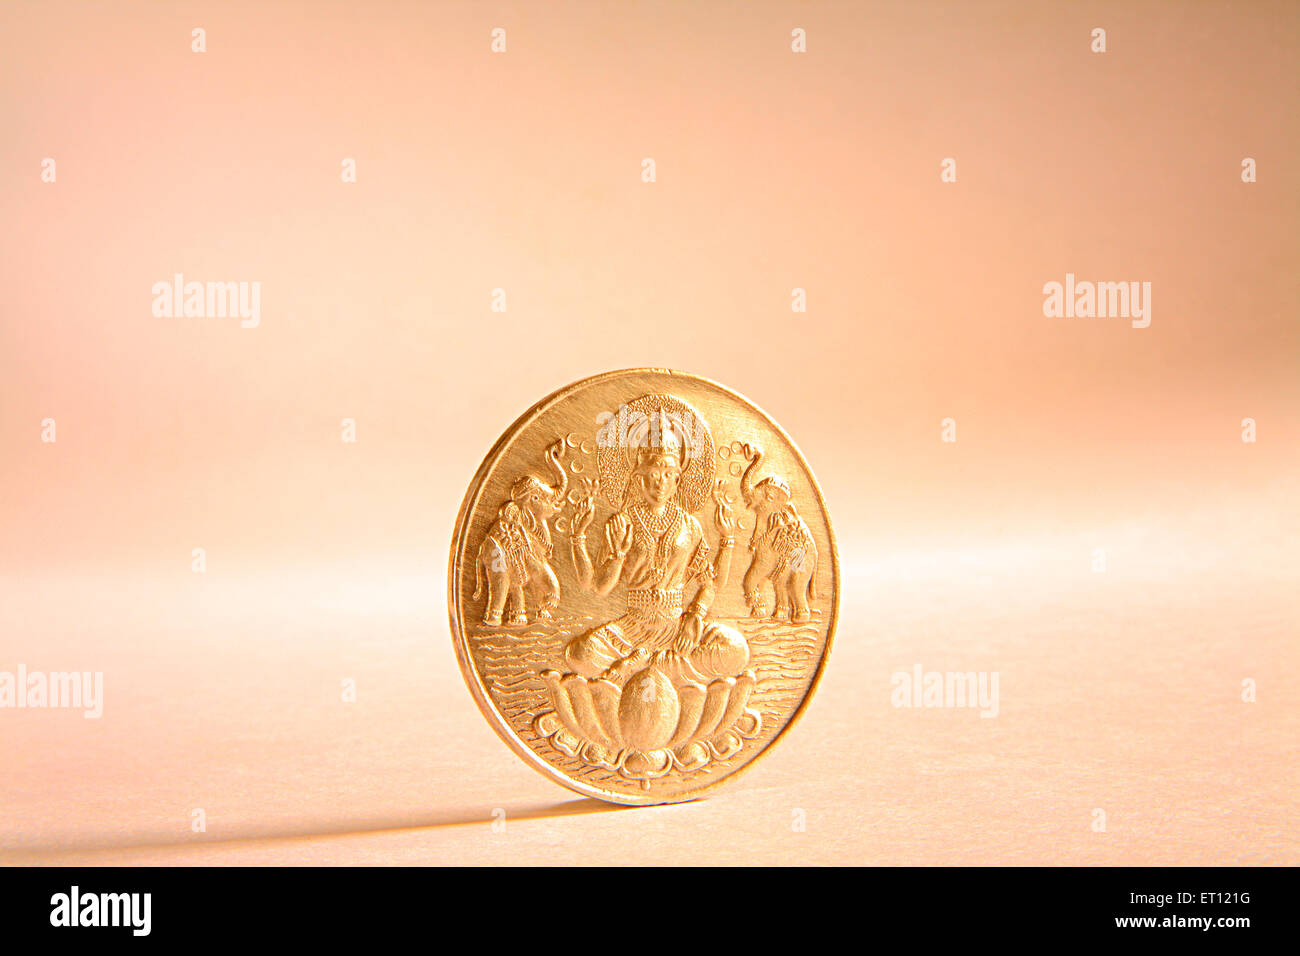 Gold coin with Goddess Lakshmi picture Stock Photo